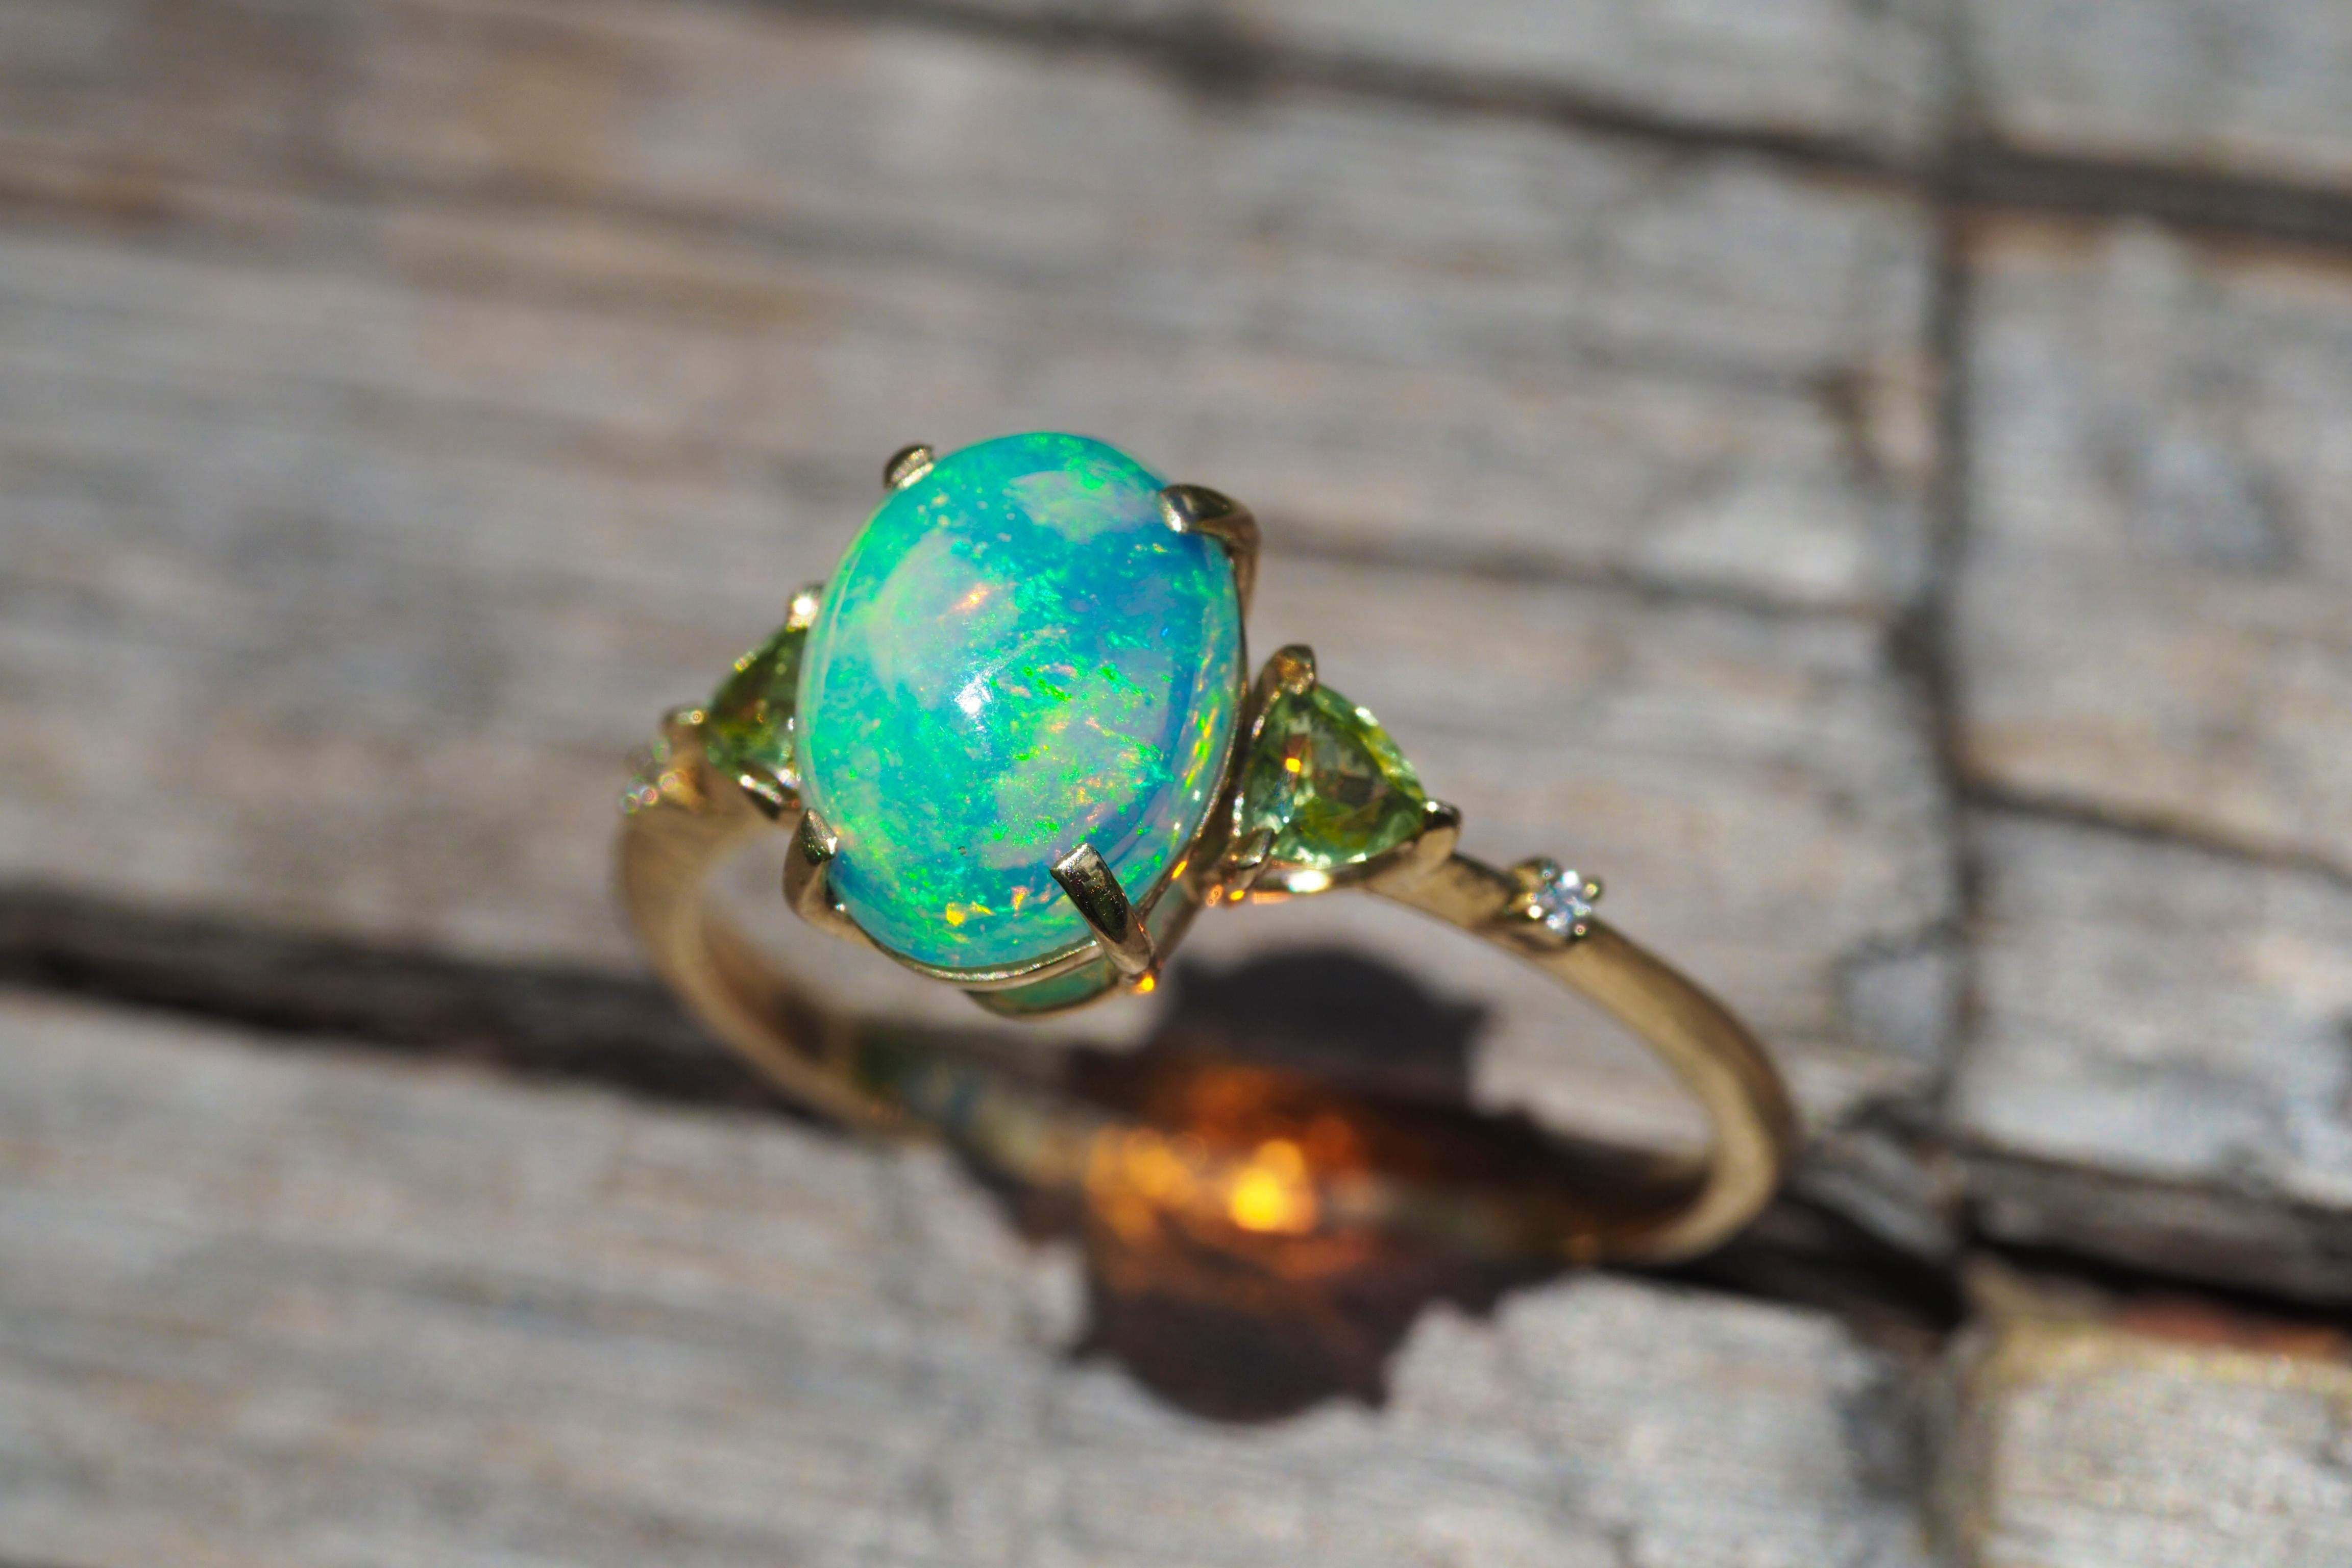 14 k gold ring with opal, peridot, diamonds. 
Dainty opal ring. Opal promise ring. Opal engagement ring. Oval opal ring. Opal vintage ring.

Metal: 14k gold
Weight: 2.0 g. depends from size

Central stone: Opal
Cut: Oval cabochon
Weight: approx 1.4